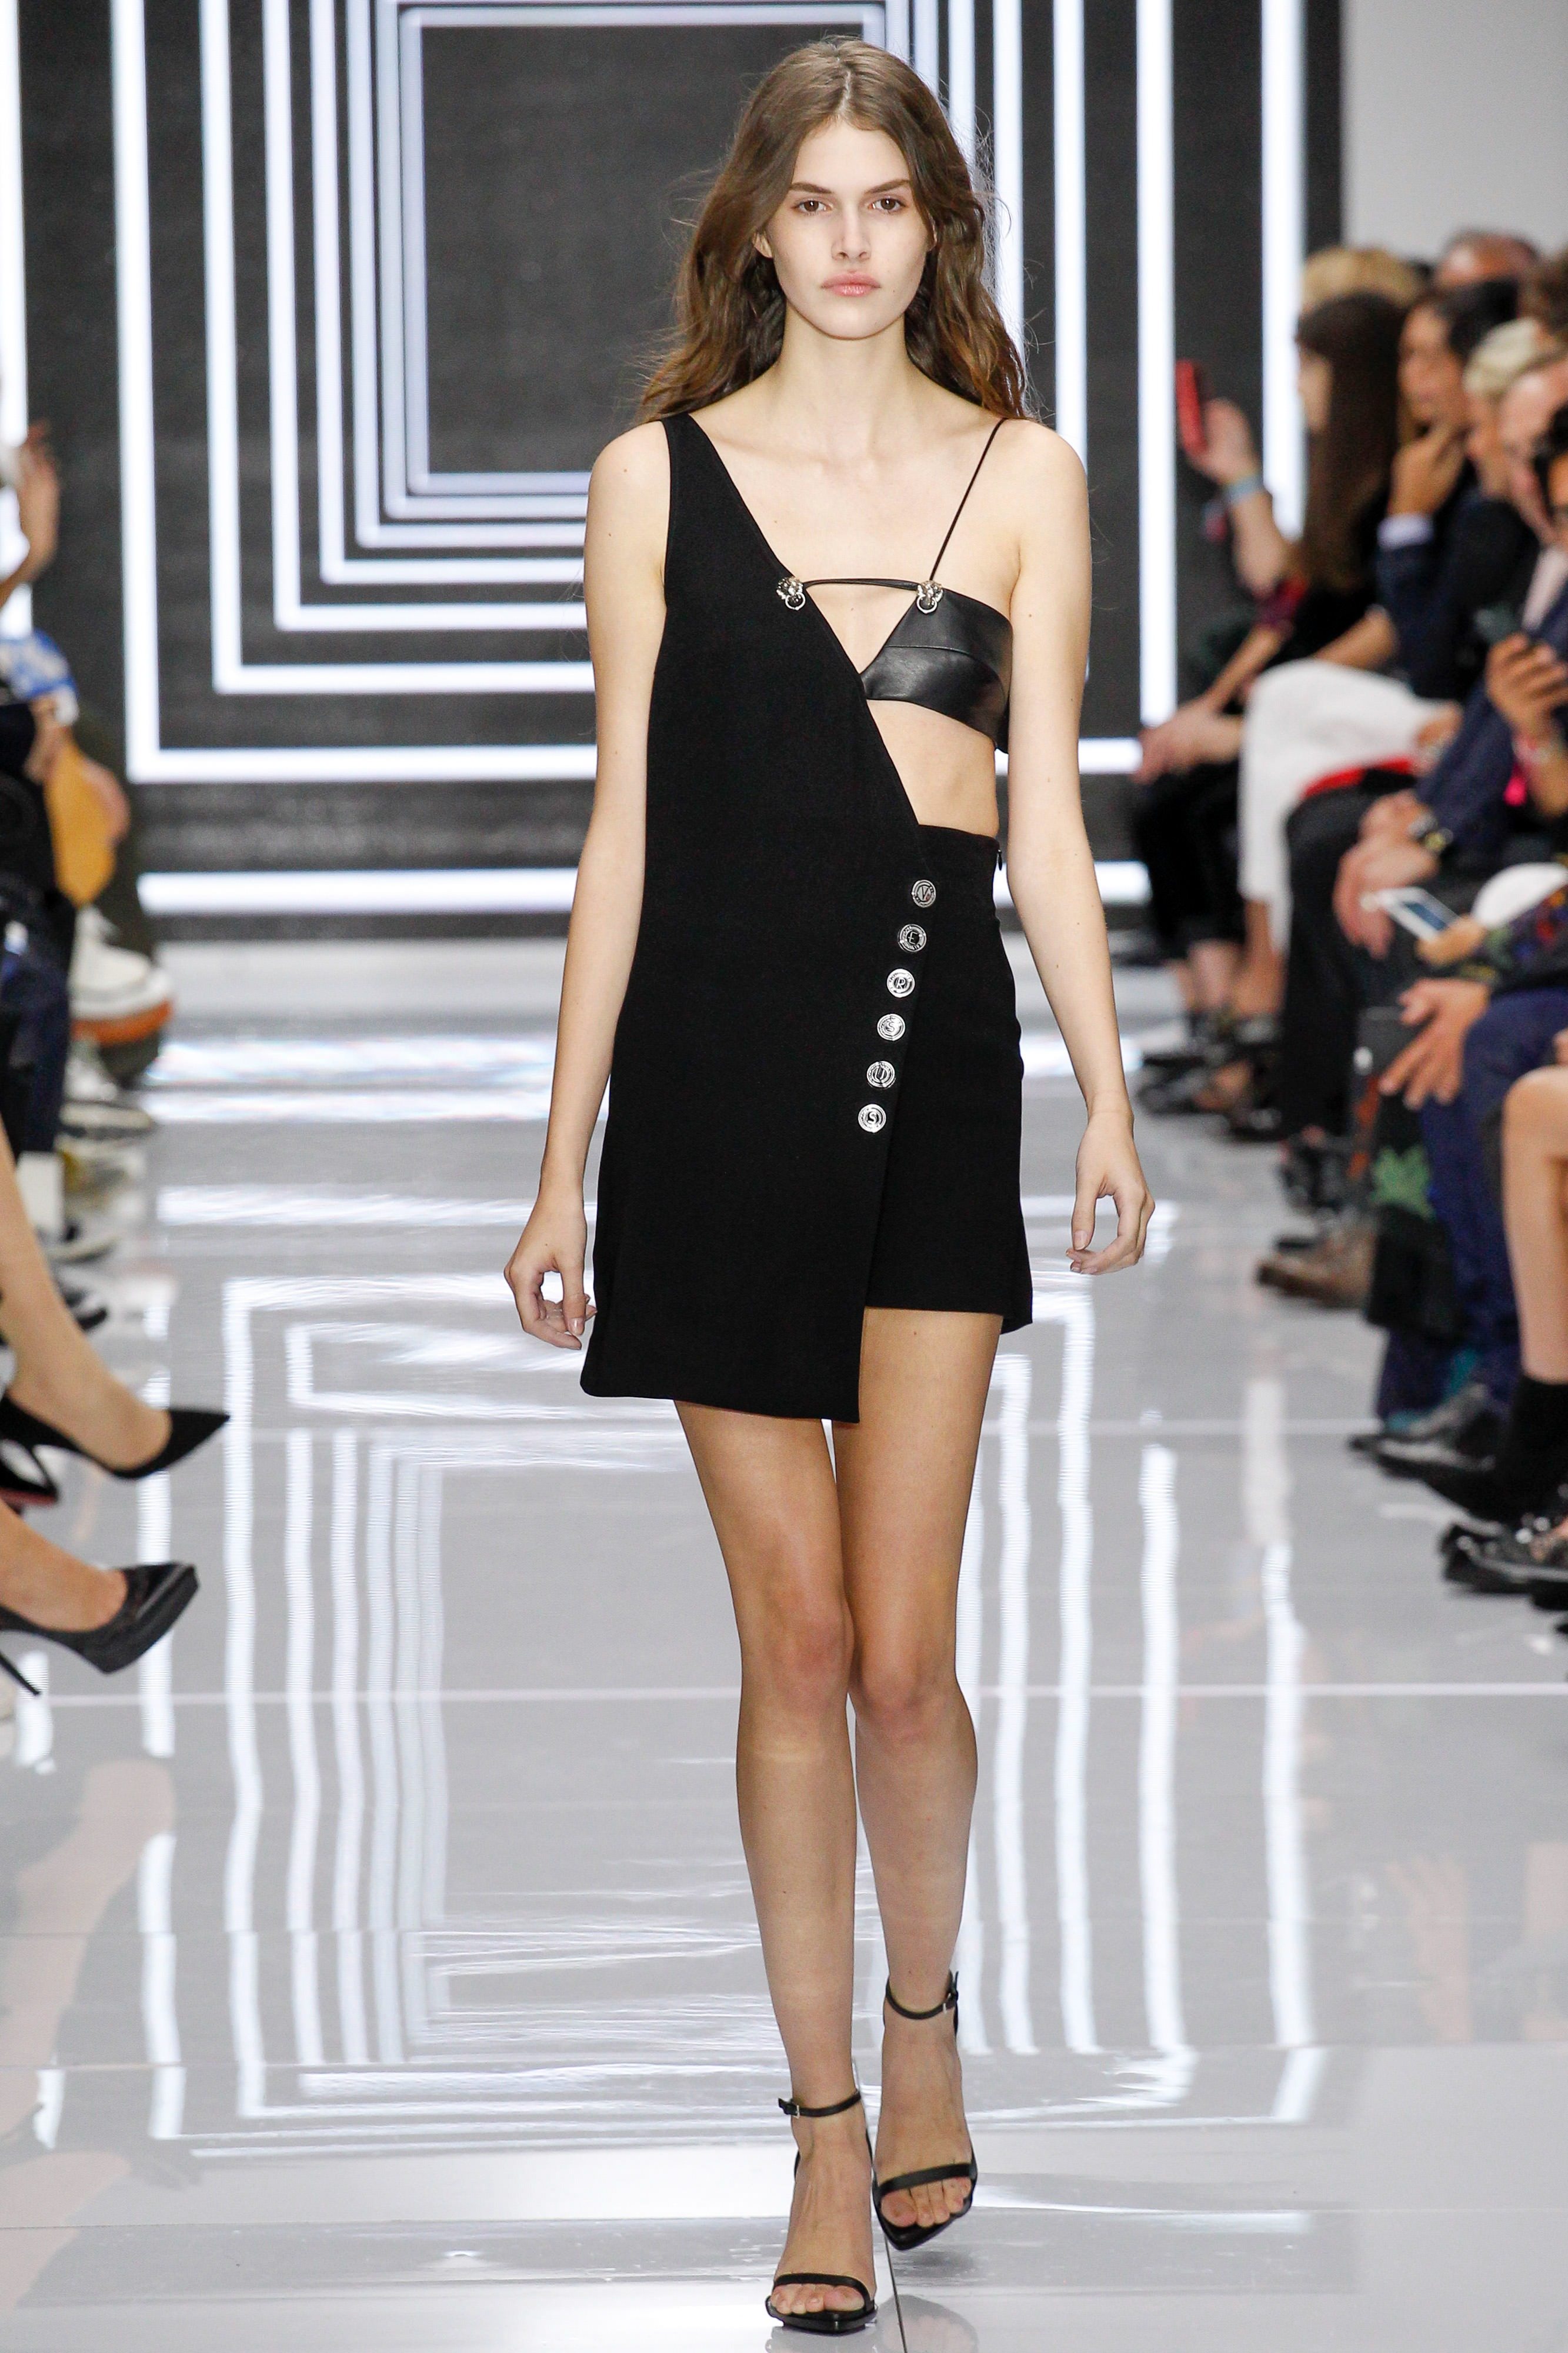 Versus Versace fashion show: interview with Anthony Vaccarello